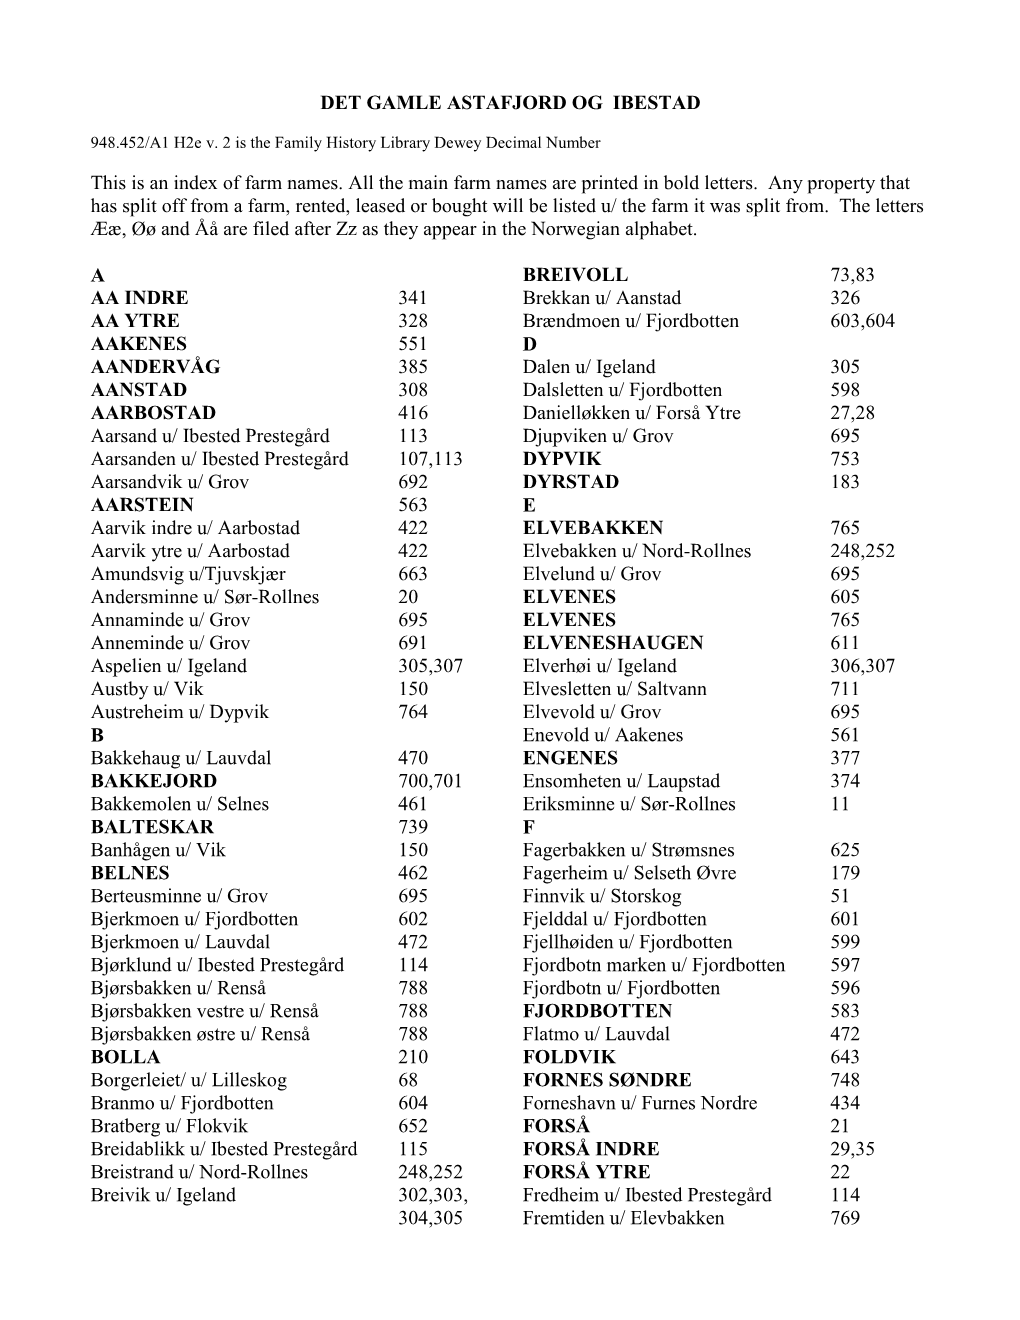 DET GAMLE ASTAFJORD OG IBESTAD This Is an Index of Farm Names. All the Main Farm Names Are Printed in Bold Letters. Any Proper